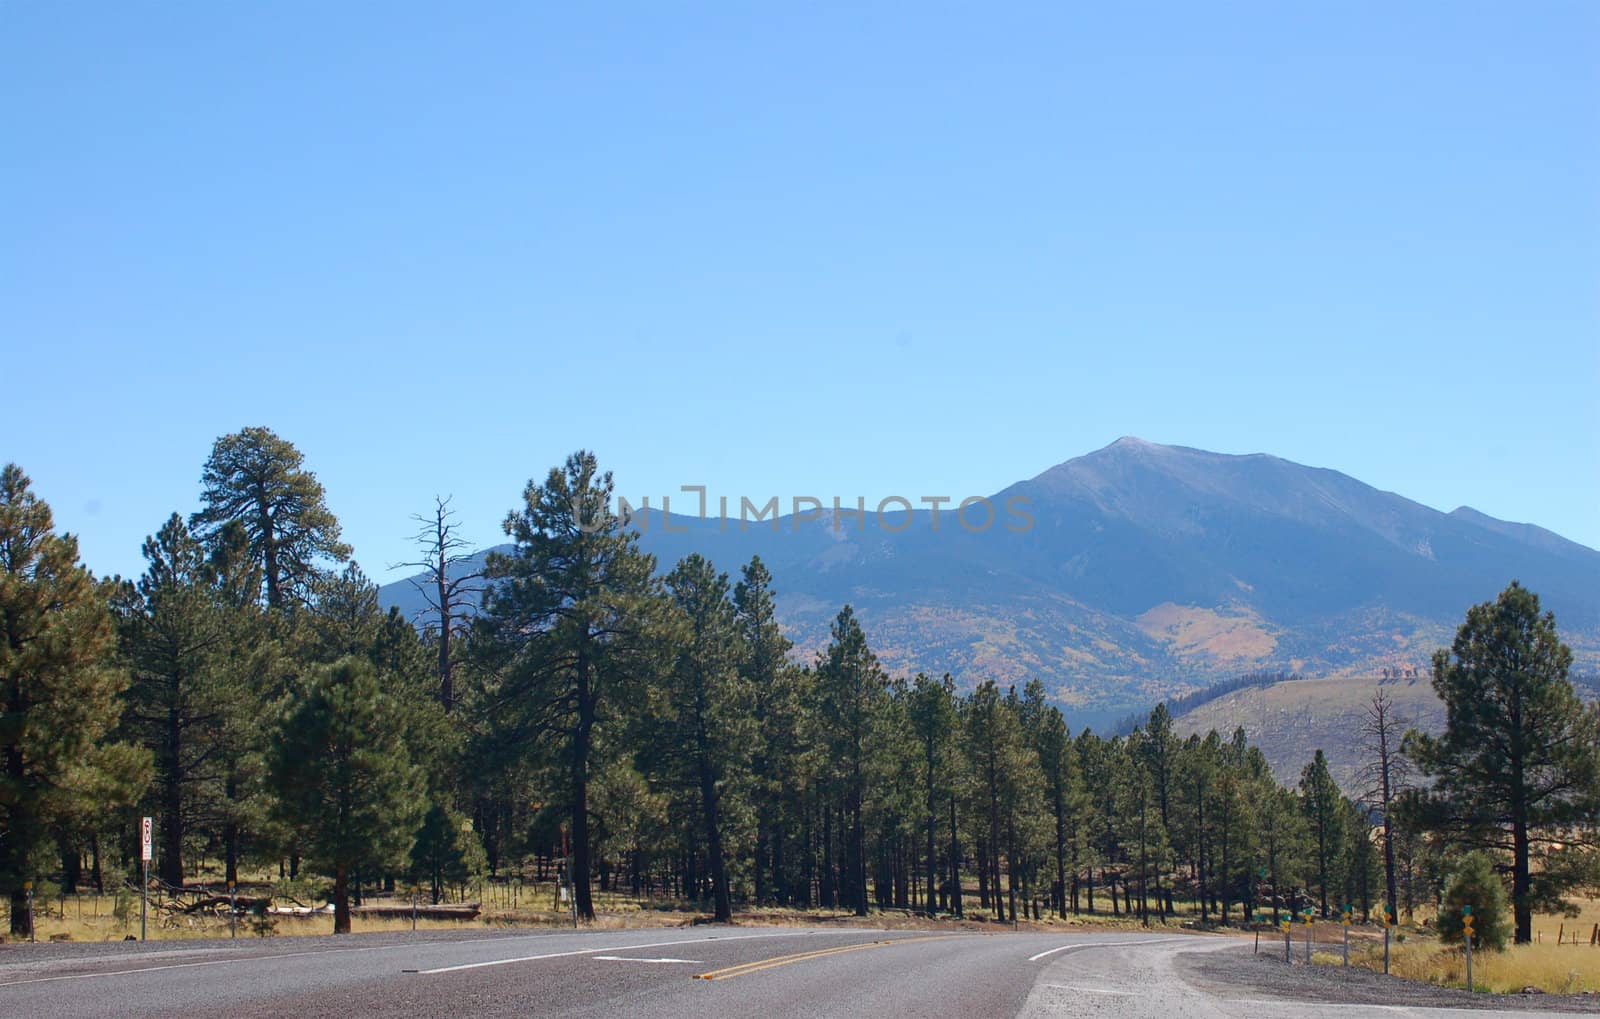 Winding road through Arizona pine forest with a mountain scape ahead beneath a blue sky